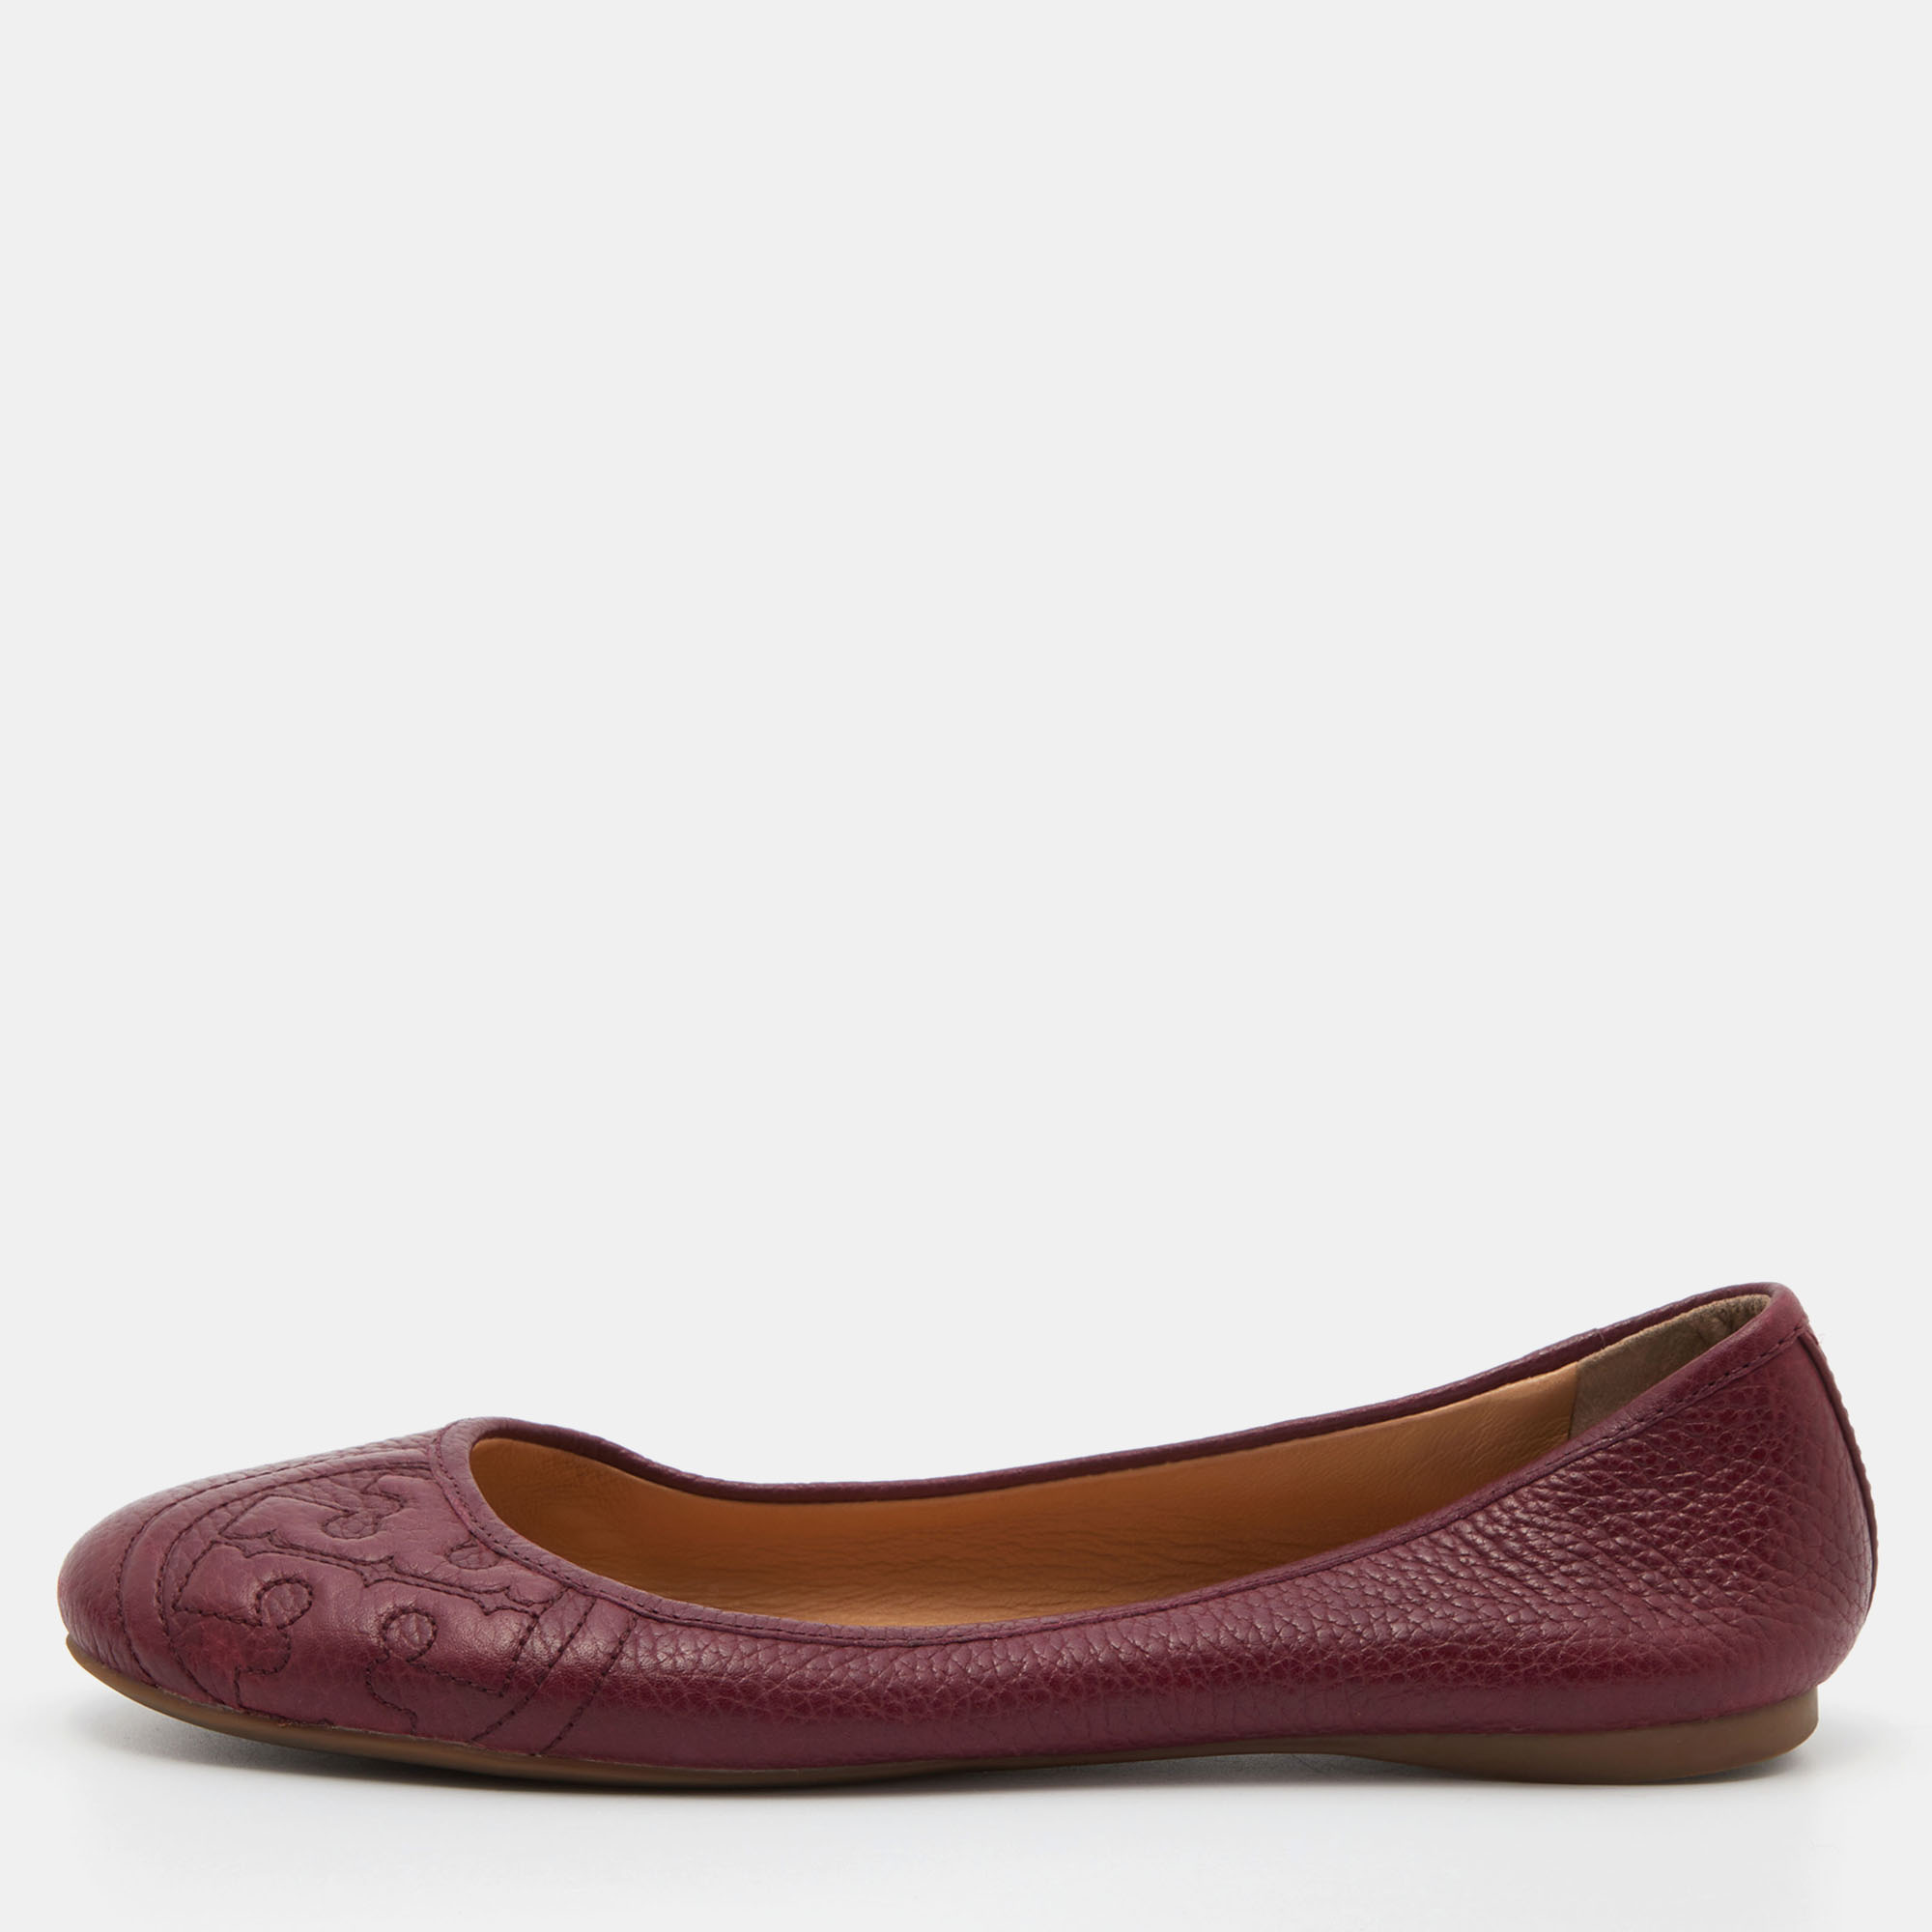 Tory Burch Burgundy Leather Ballet Flats Size 36.5